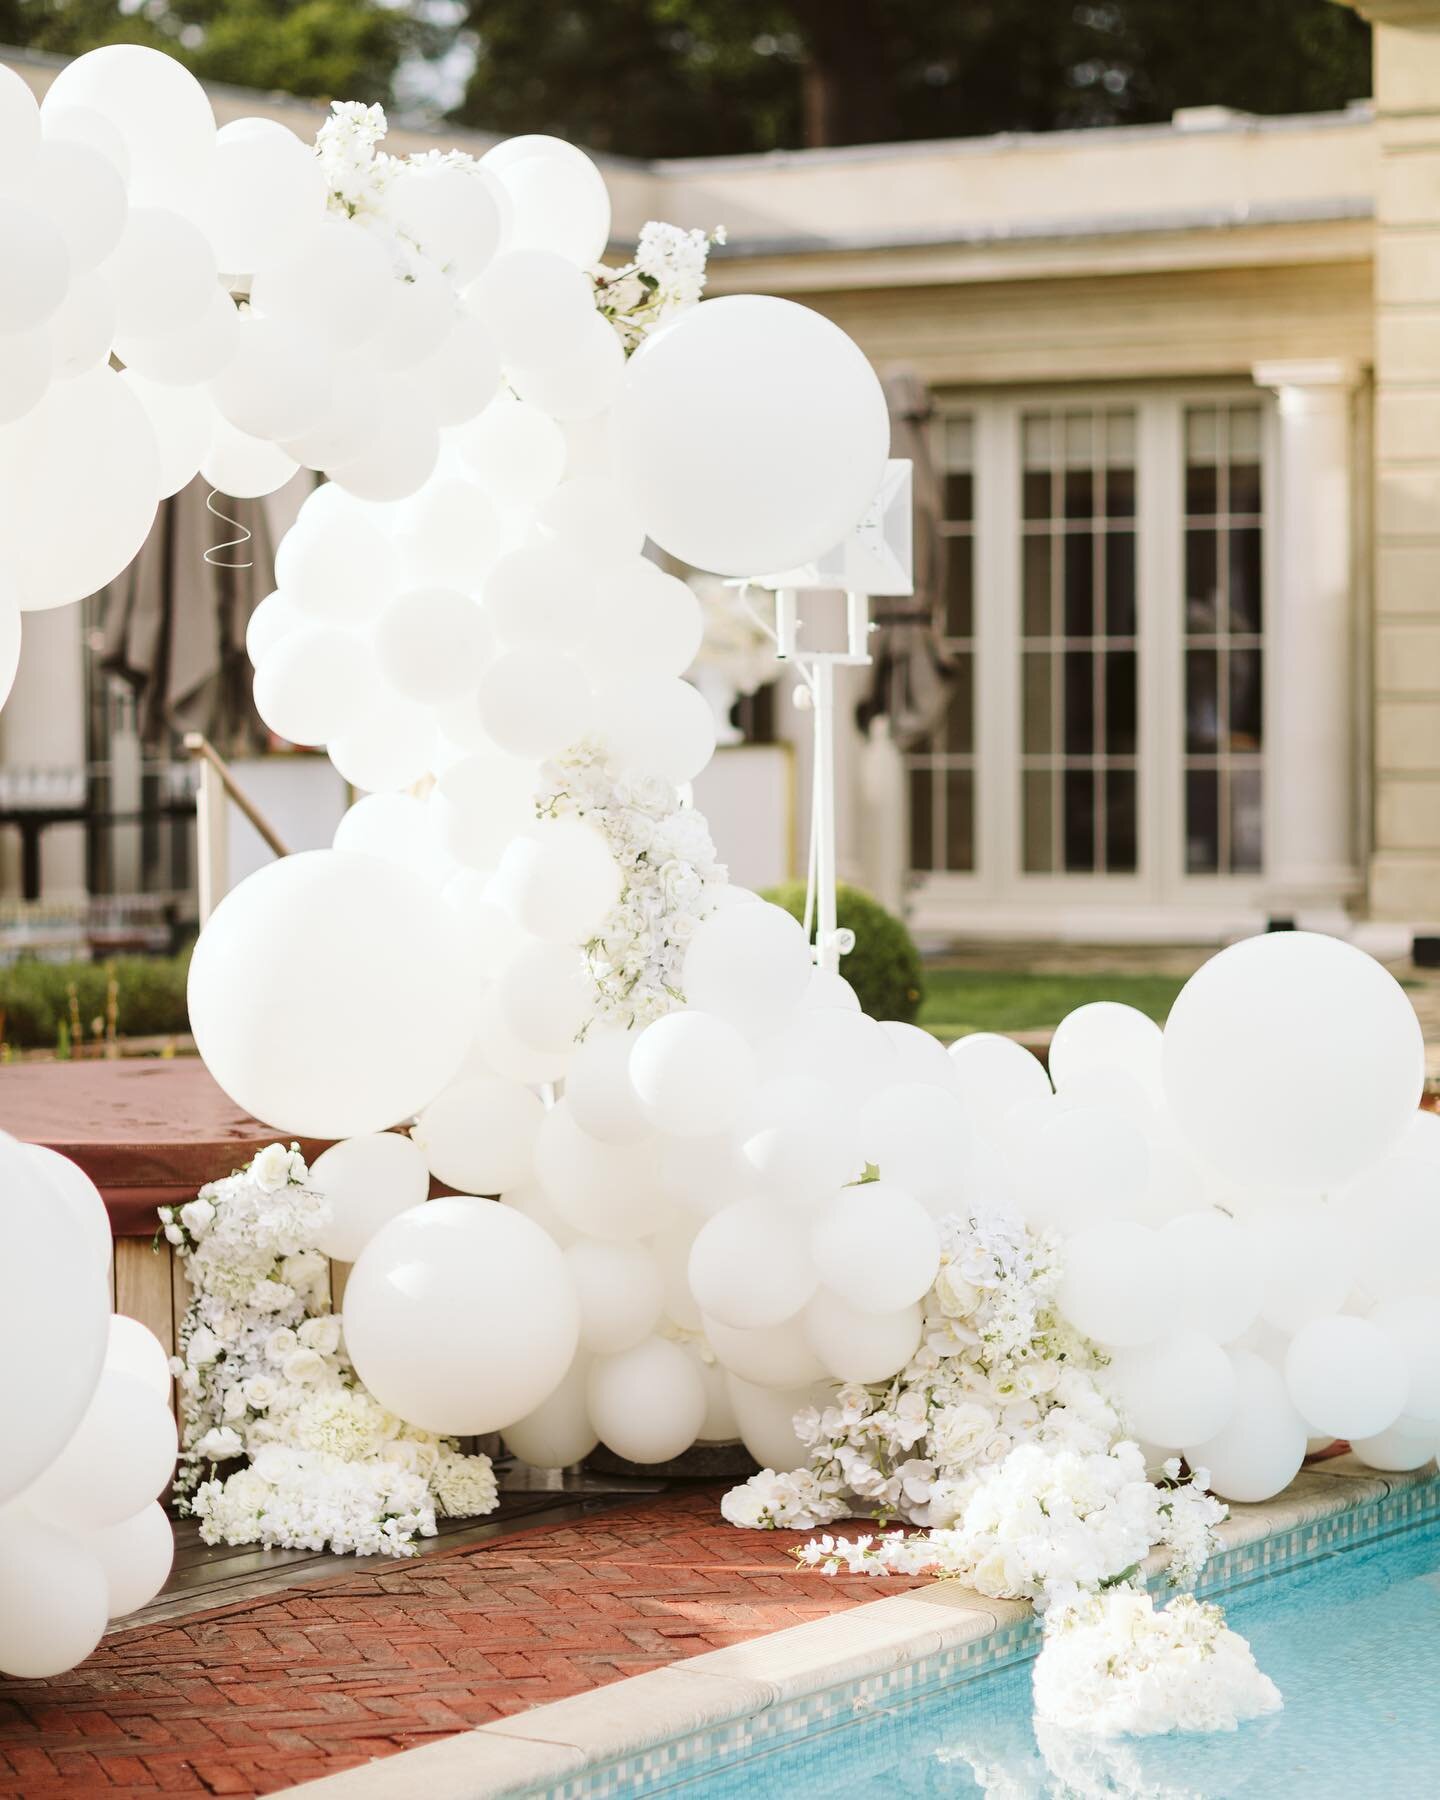 White pool party with amazing balloon arch by @elari_events 🤍 Location: Clivedenhouse Photographer @moment_studio Gorgeous flowers by @wildaboutflower Wedding planner and designer: GLENNE Luxury Weddings & Events # glenne # clivedenhouse # clived